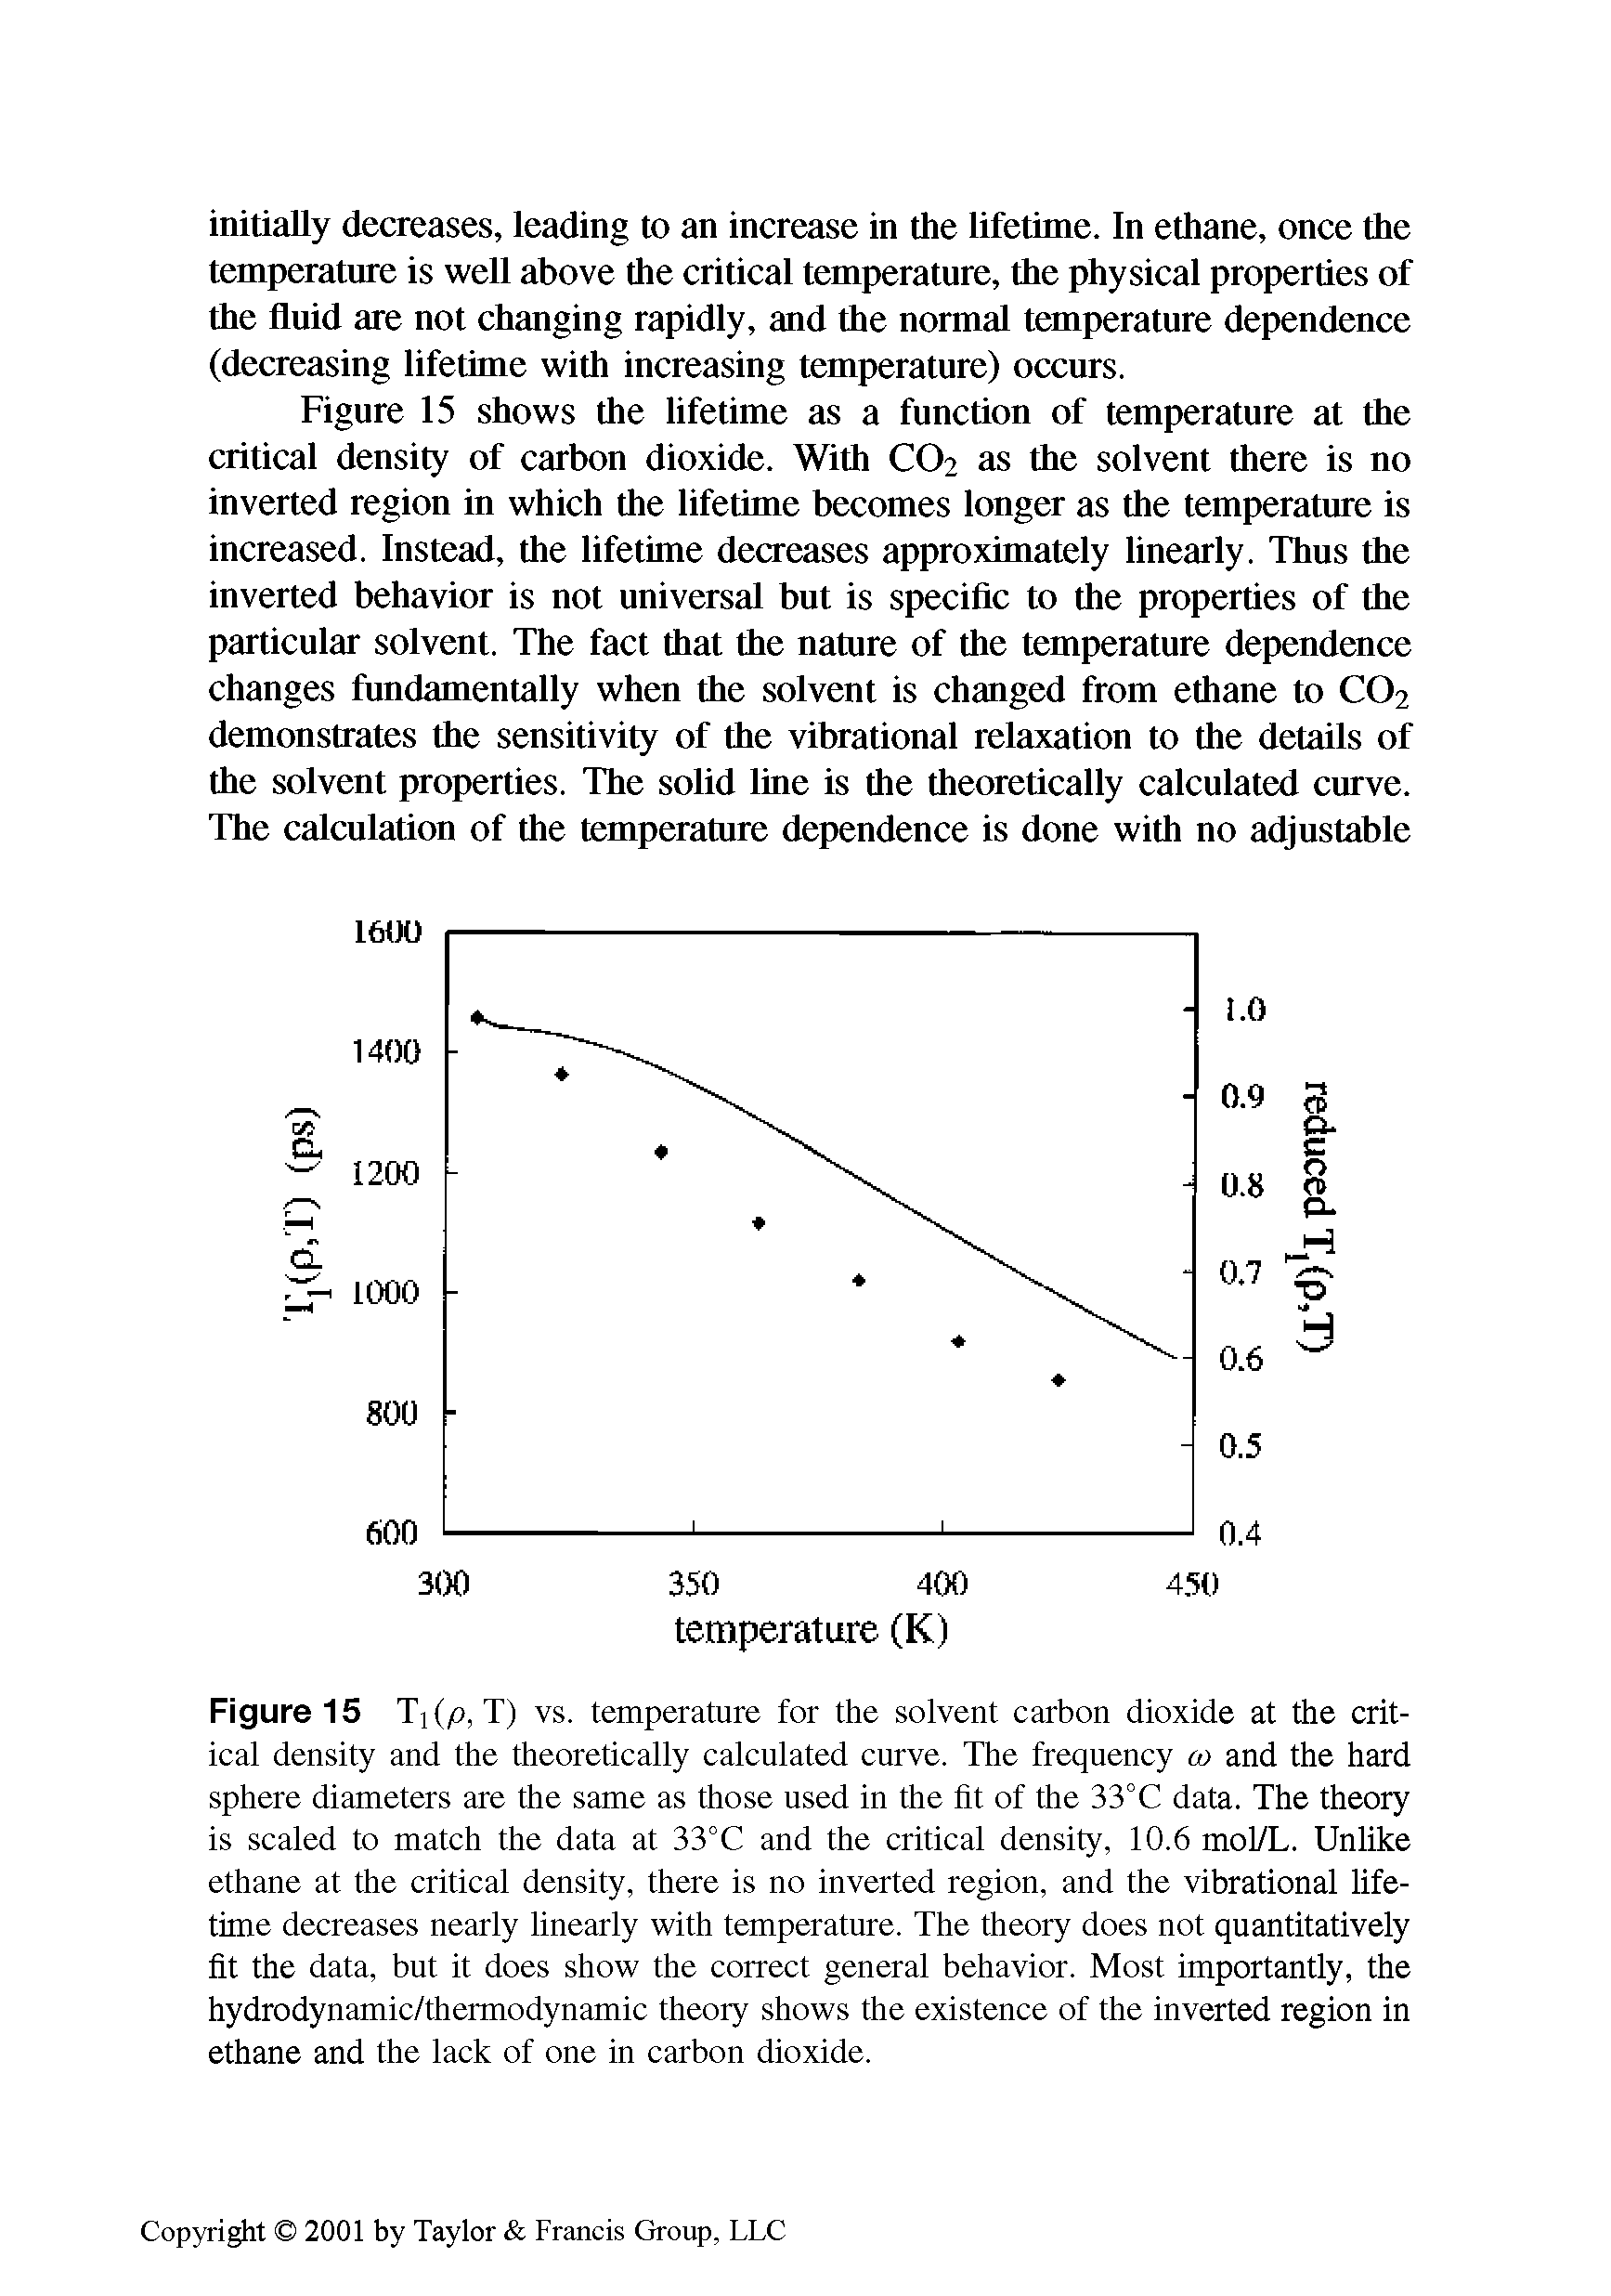 Figure 15 Tj (p, T) vs. temperature for the solvent carbon dioxide at the critical density and the theoretically calculated curve. The frequency u> and the hard sphere diameters are the same as those used in the fit of the 33°C data. The theory is scaled to match the data at 33°C and the critical density, 10.6 mol/L. Unlike ethane at the critical density, there is no inverted region, and the vibrational lifetime decreases nearly linearly with temperature. The theory does not quantitatively fit the data, but it does show the correct general behavior. Most importantly, the hydrodynamic/thermodynamic theory shows the existence of the inverted region in ethane and the lack of one in carbon dioxide.